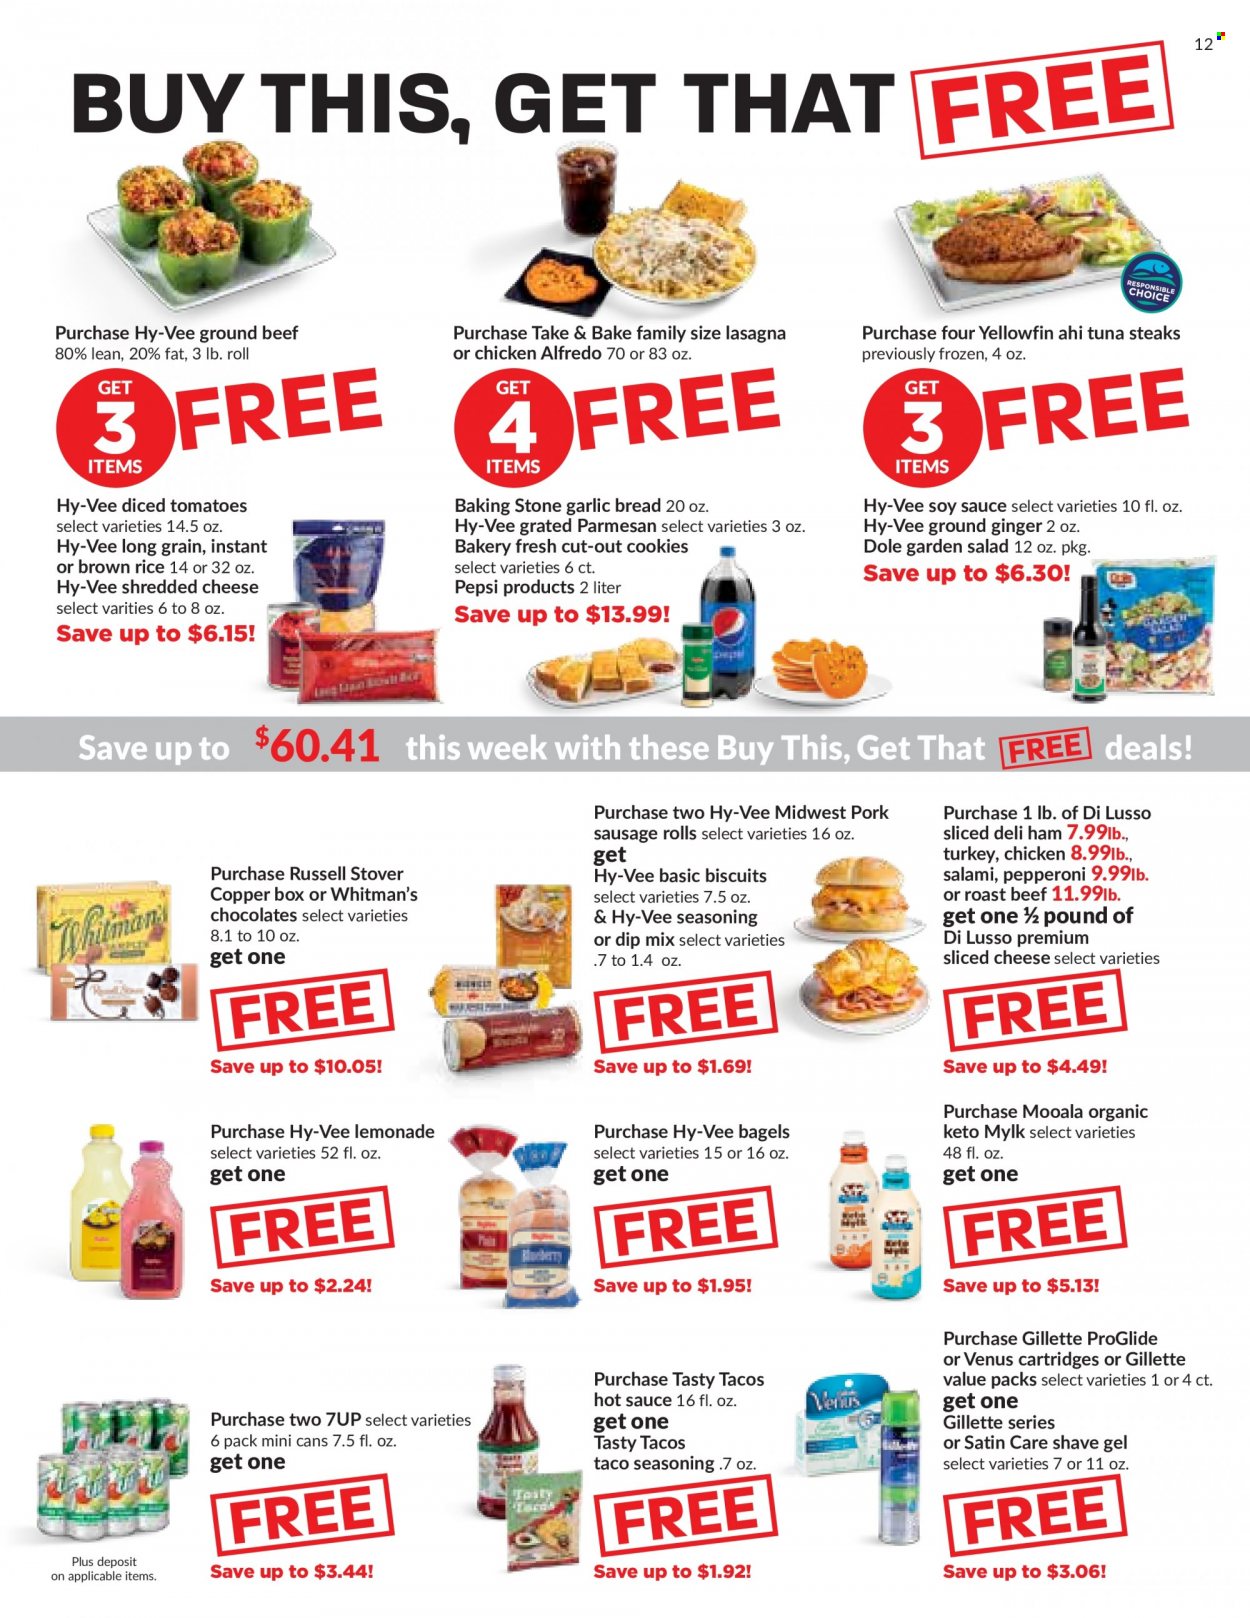 thumbnail - Hy-Vee Flyer - 10/20/2021 - 10/26/2021 - Sales products - bagels, bread, sausage rolls, tacos, ginger, tomatoes, salad, Dole, tuna, sauce, lasagna meal, salami, ham, sausage, pork sausage, pepperoni, shredded cheese, sliced cheese, parmesan, dip, cookies, chocolate, biscuit, brown rice, rice, ground ginger, spice, soy sauce, hot sauce, lemonade, Pepsi, 7UP, beef meat, ground beef, steak, roast beef, Gillette, shave gel, Venus. Page 12.